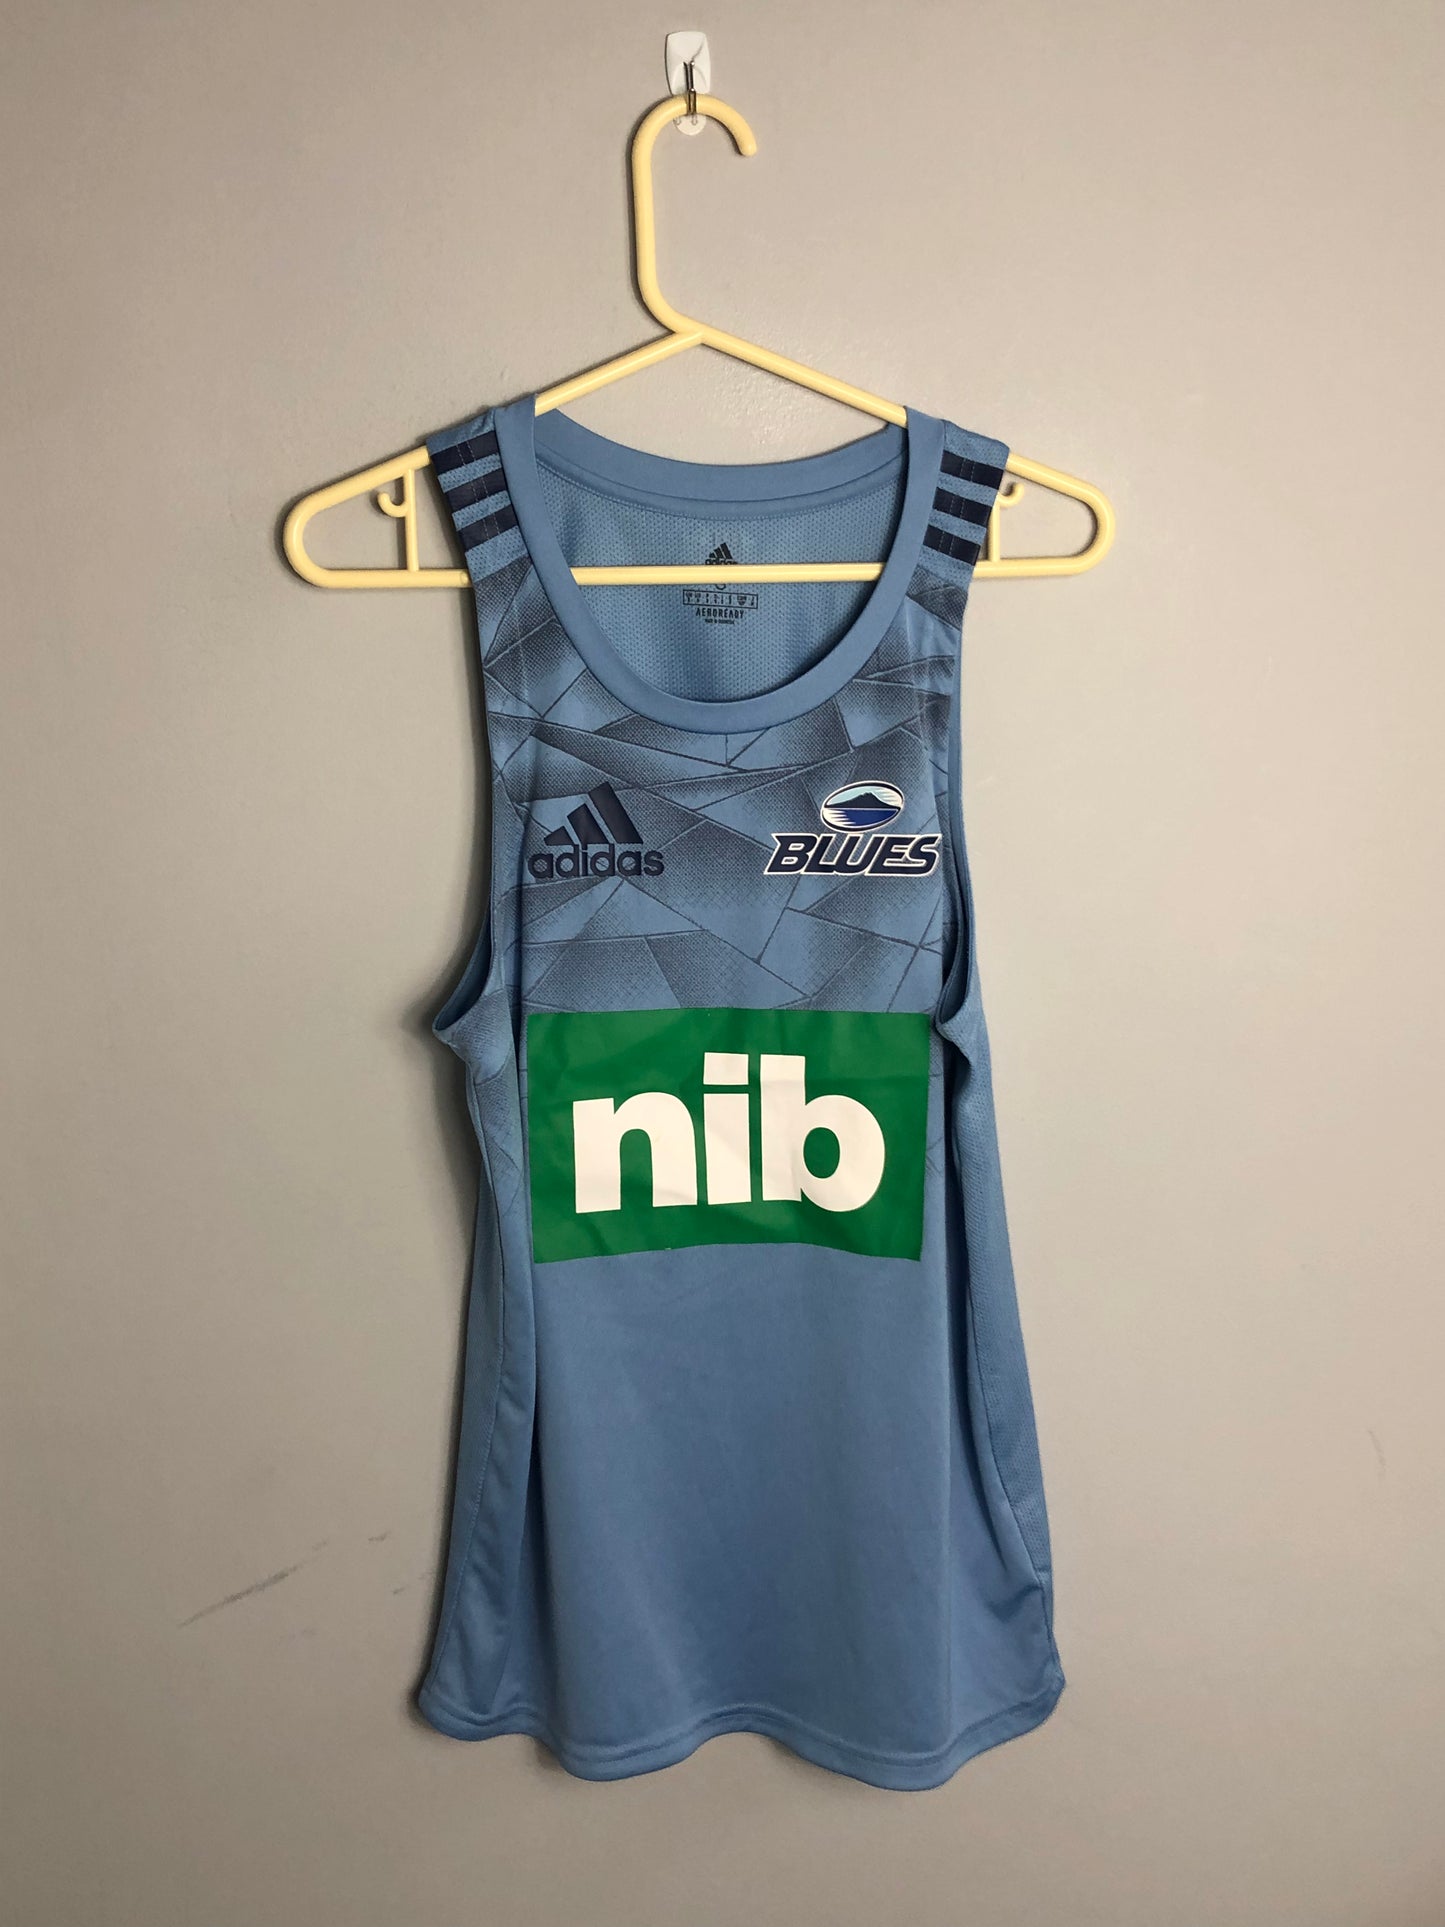 Blues Rugby Vest - 38” Chest - Small